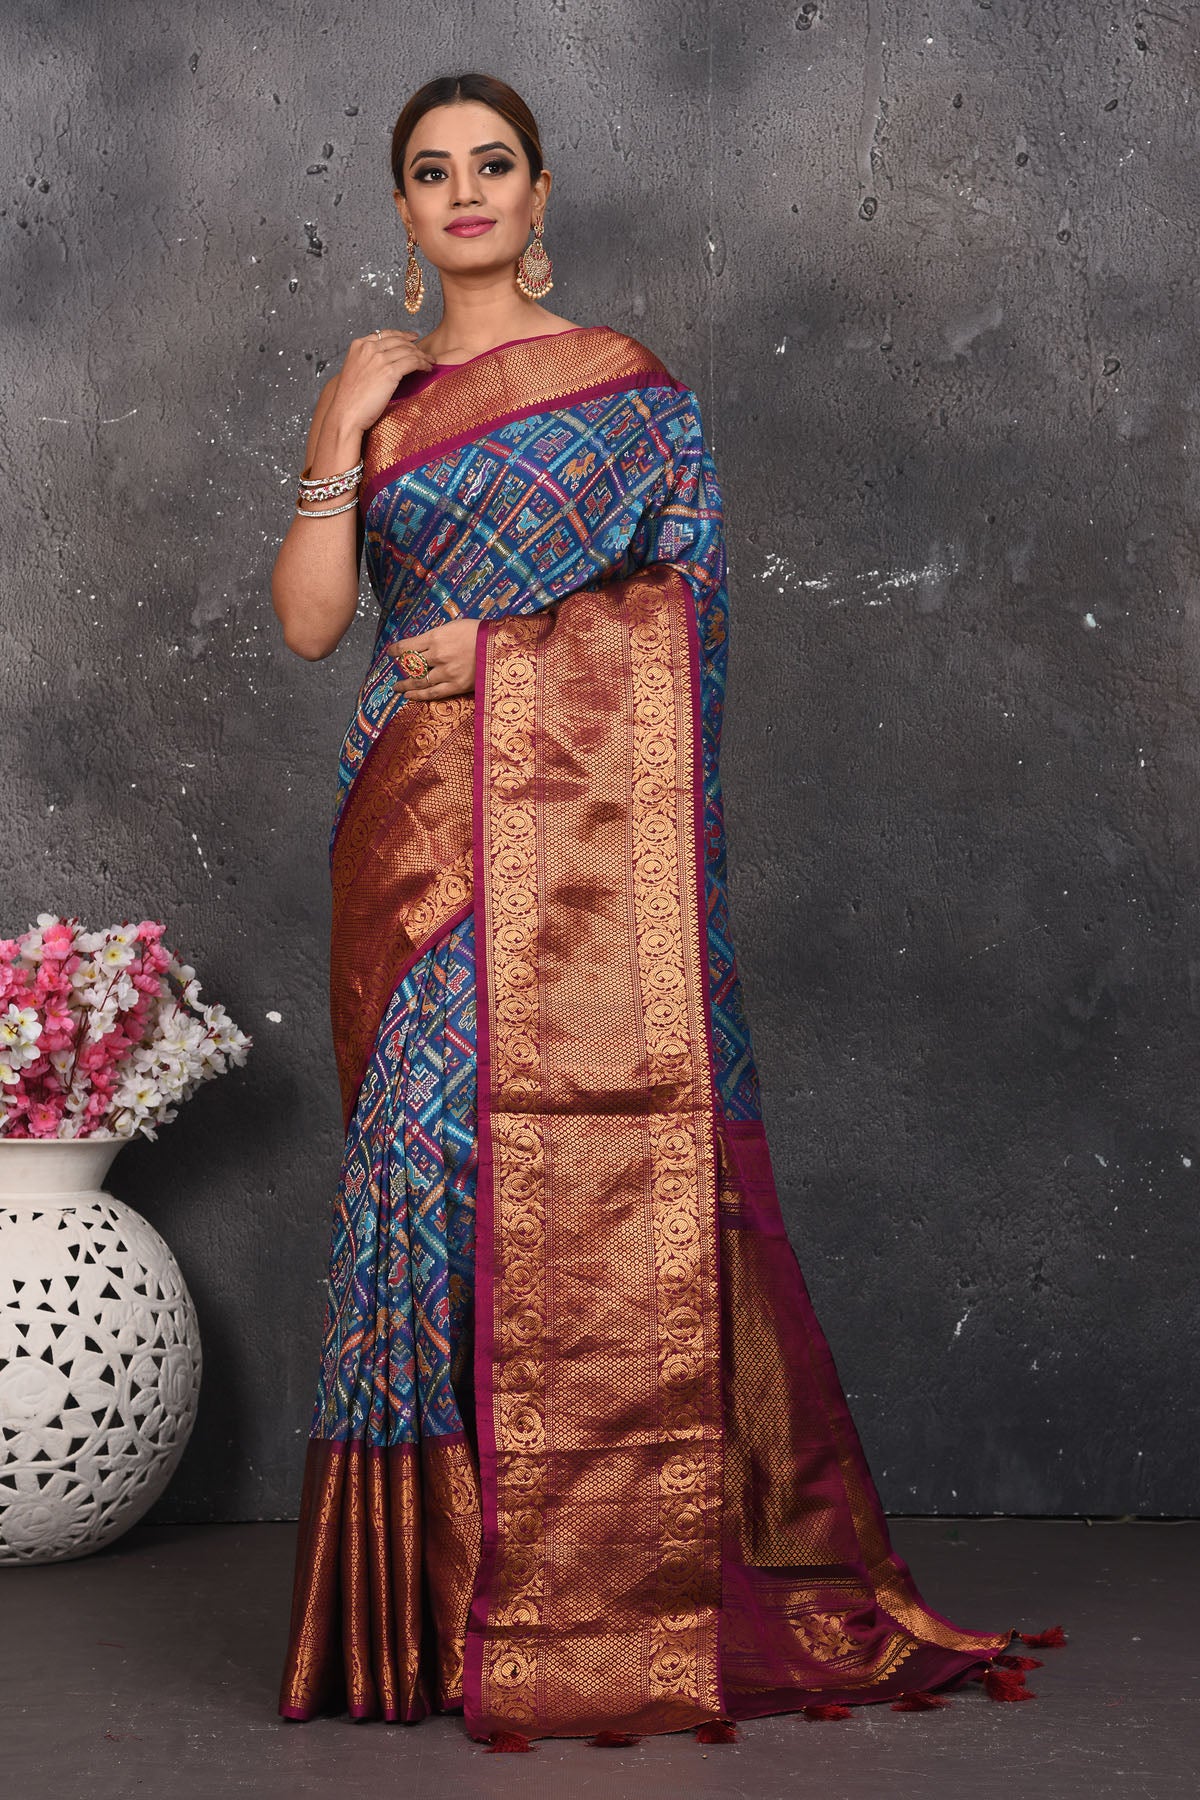 Buy this royal banarasi silk saree with pashmina weaving adorned with antique zari work online in USA which has crafted by skilled weaver of Banaras with elegance and grace, this saree is definitely the epitome of beauty and a must have in your collection. Buy designer handwoven banarasi pashmina sari with any blouse from Pure Elegance Indian saree store in USA.- Full view.